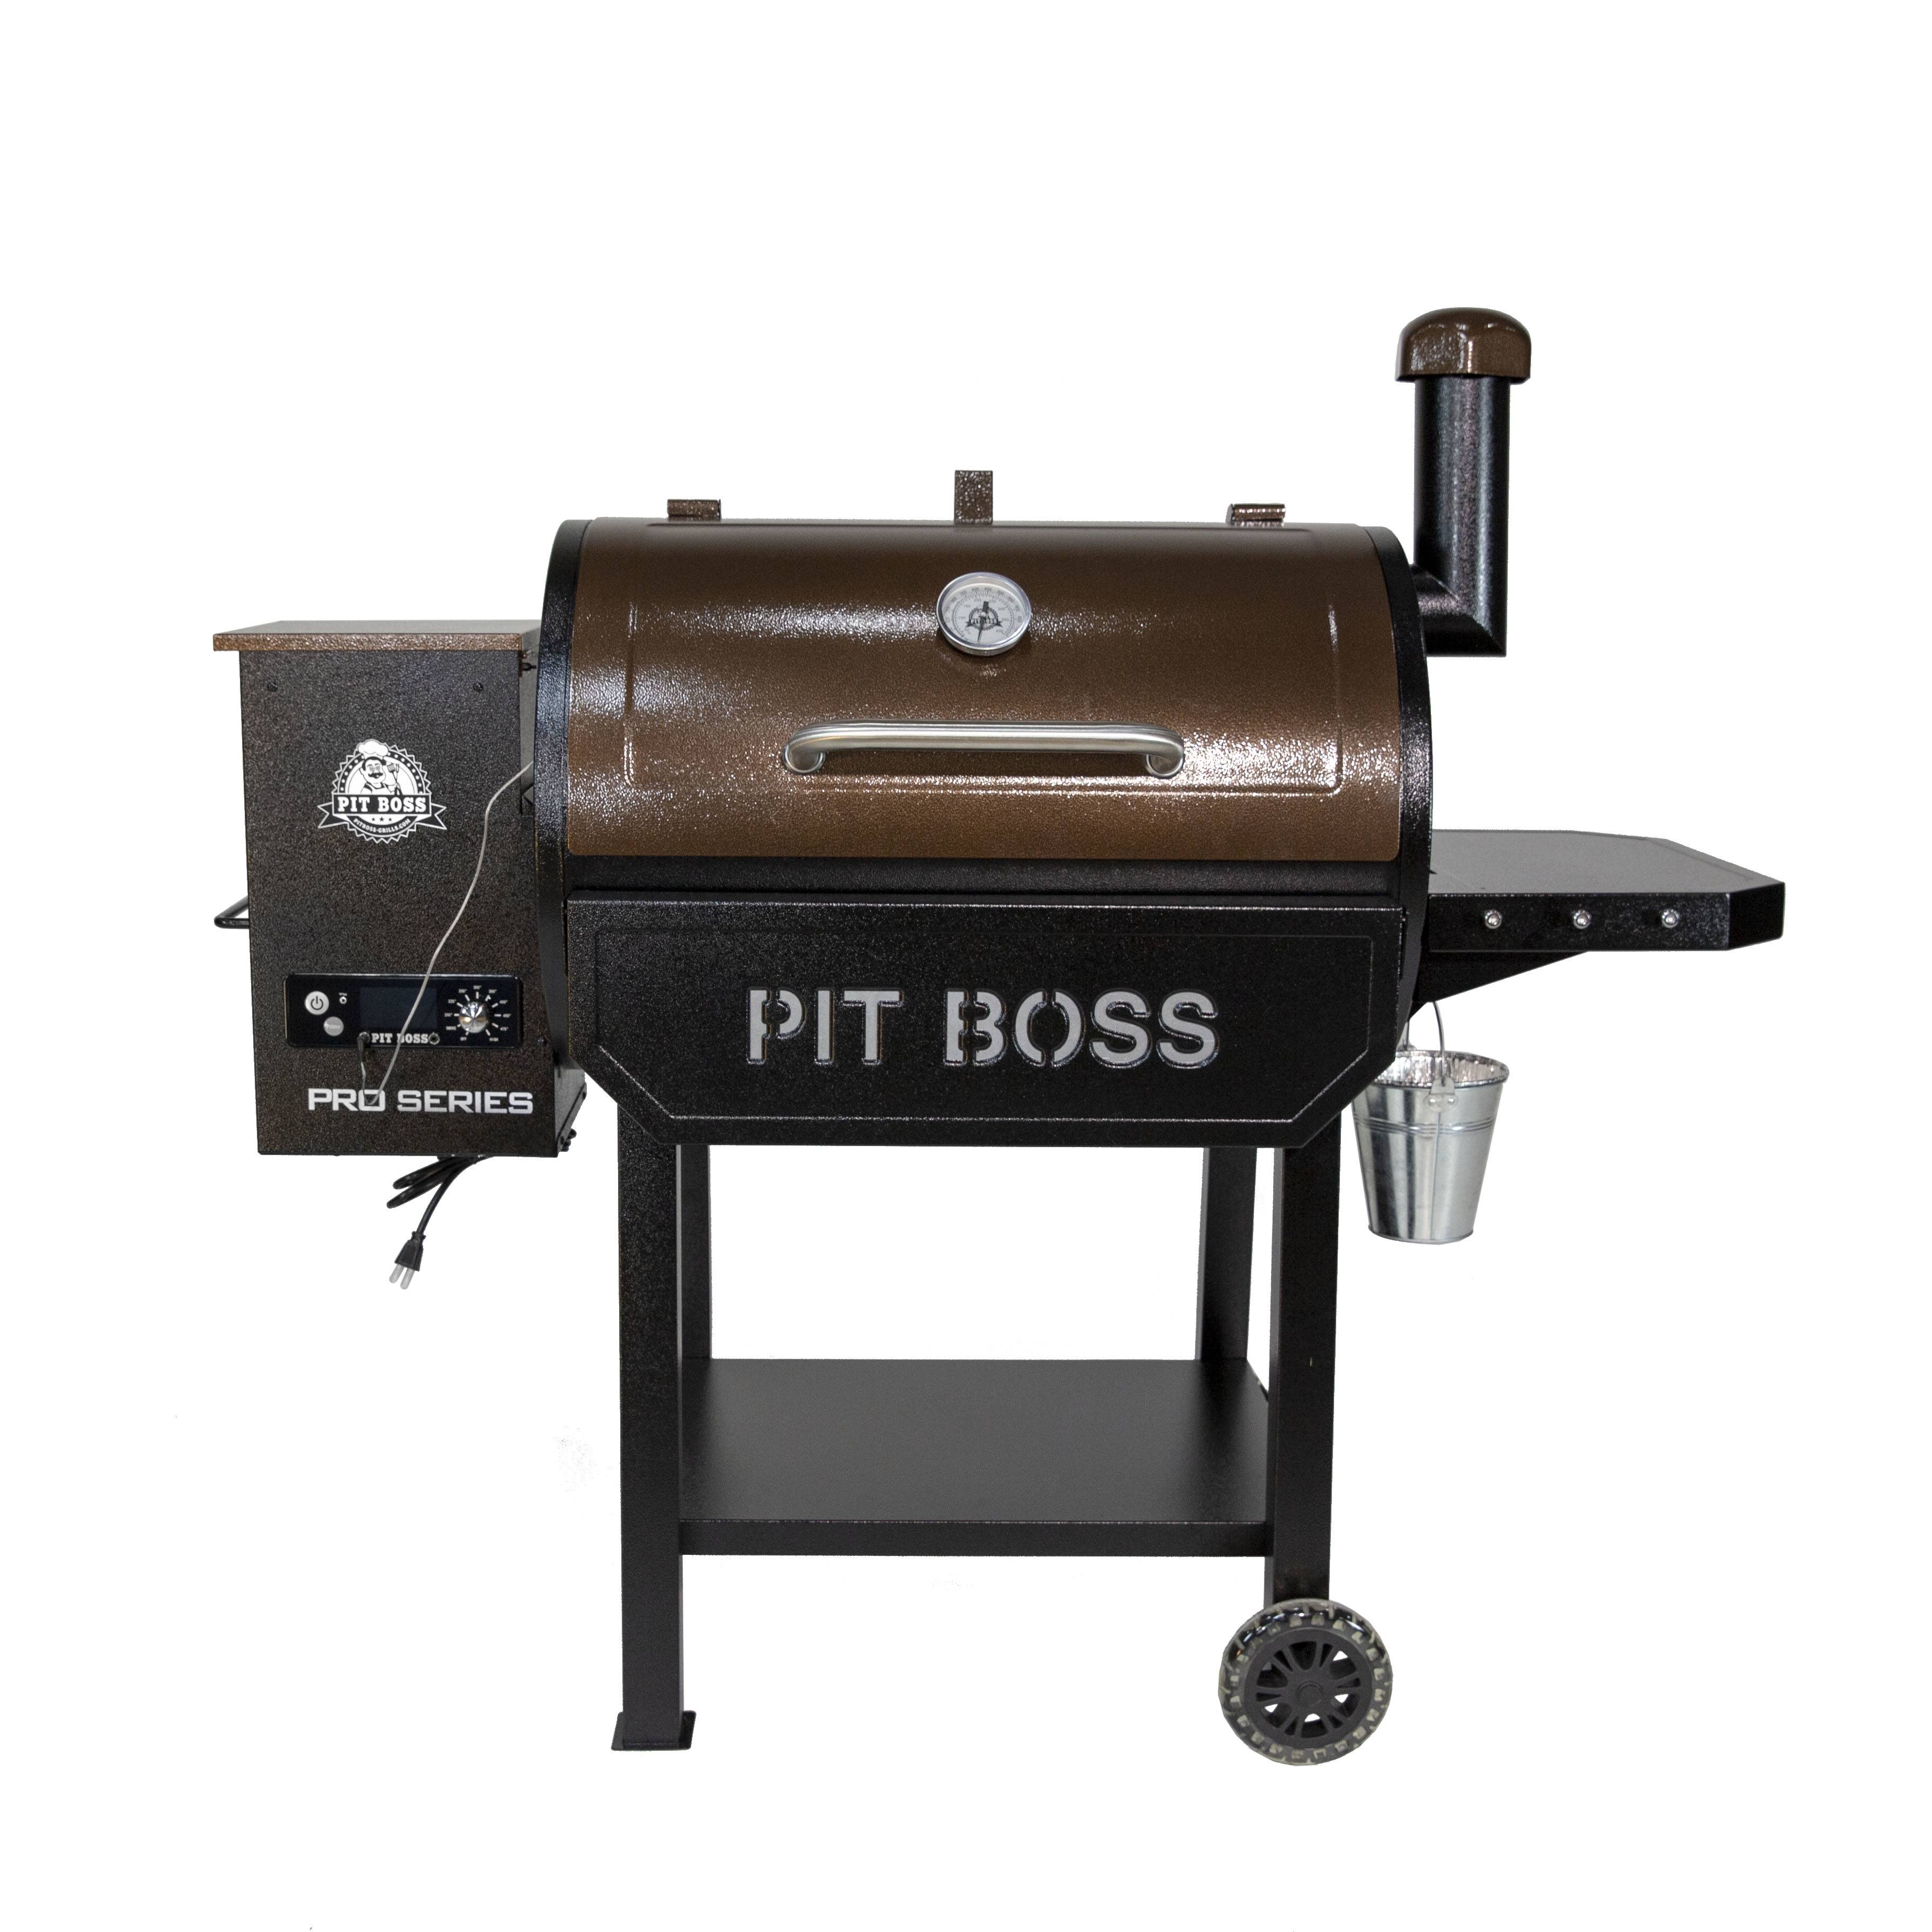 Heart of Hope Pregnancy Raffling Off Pit Boss Pro Series Grill To Raise Money for Local Young Mothers In Need